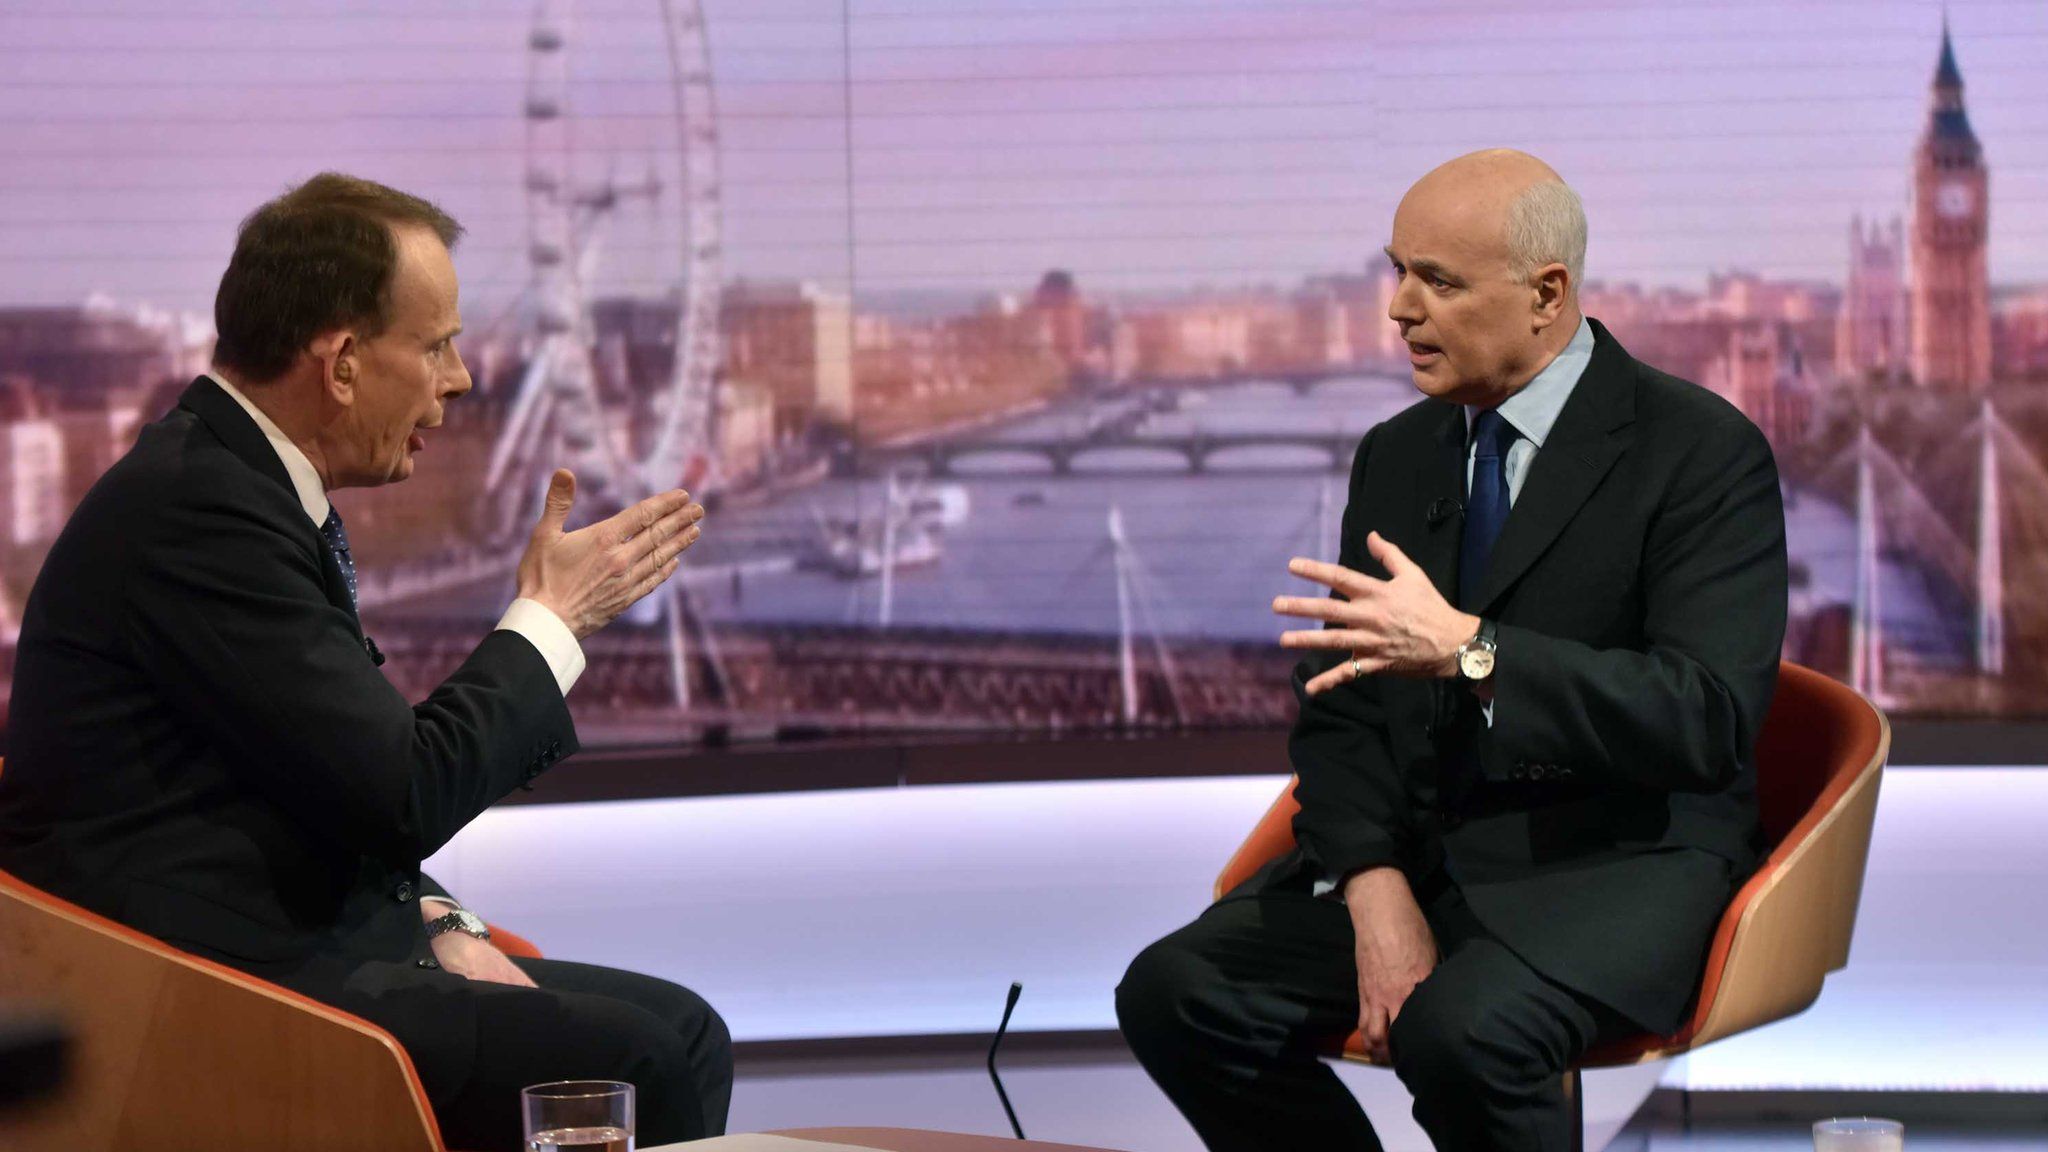 Andrew Marr and Iain Duncan Smith